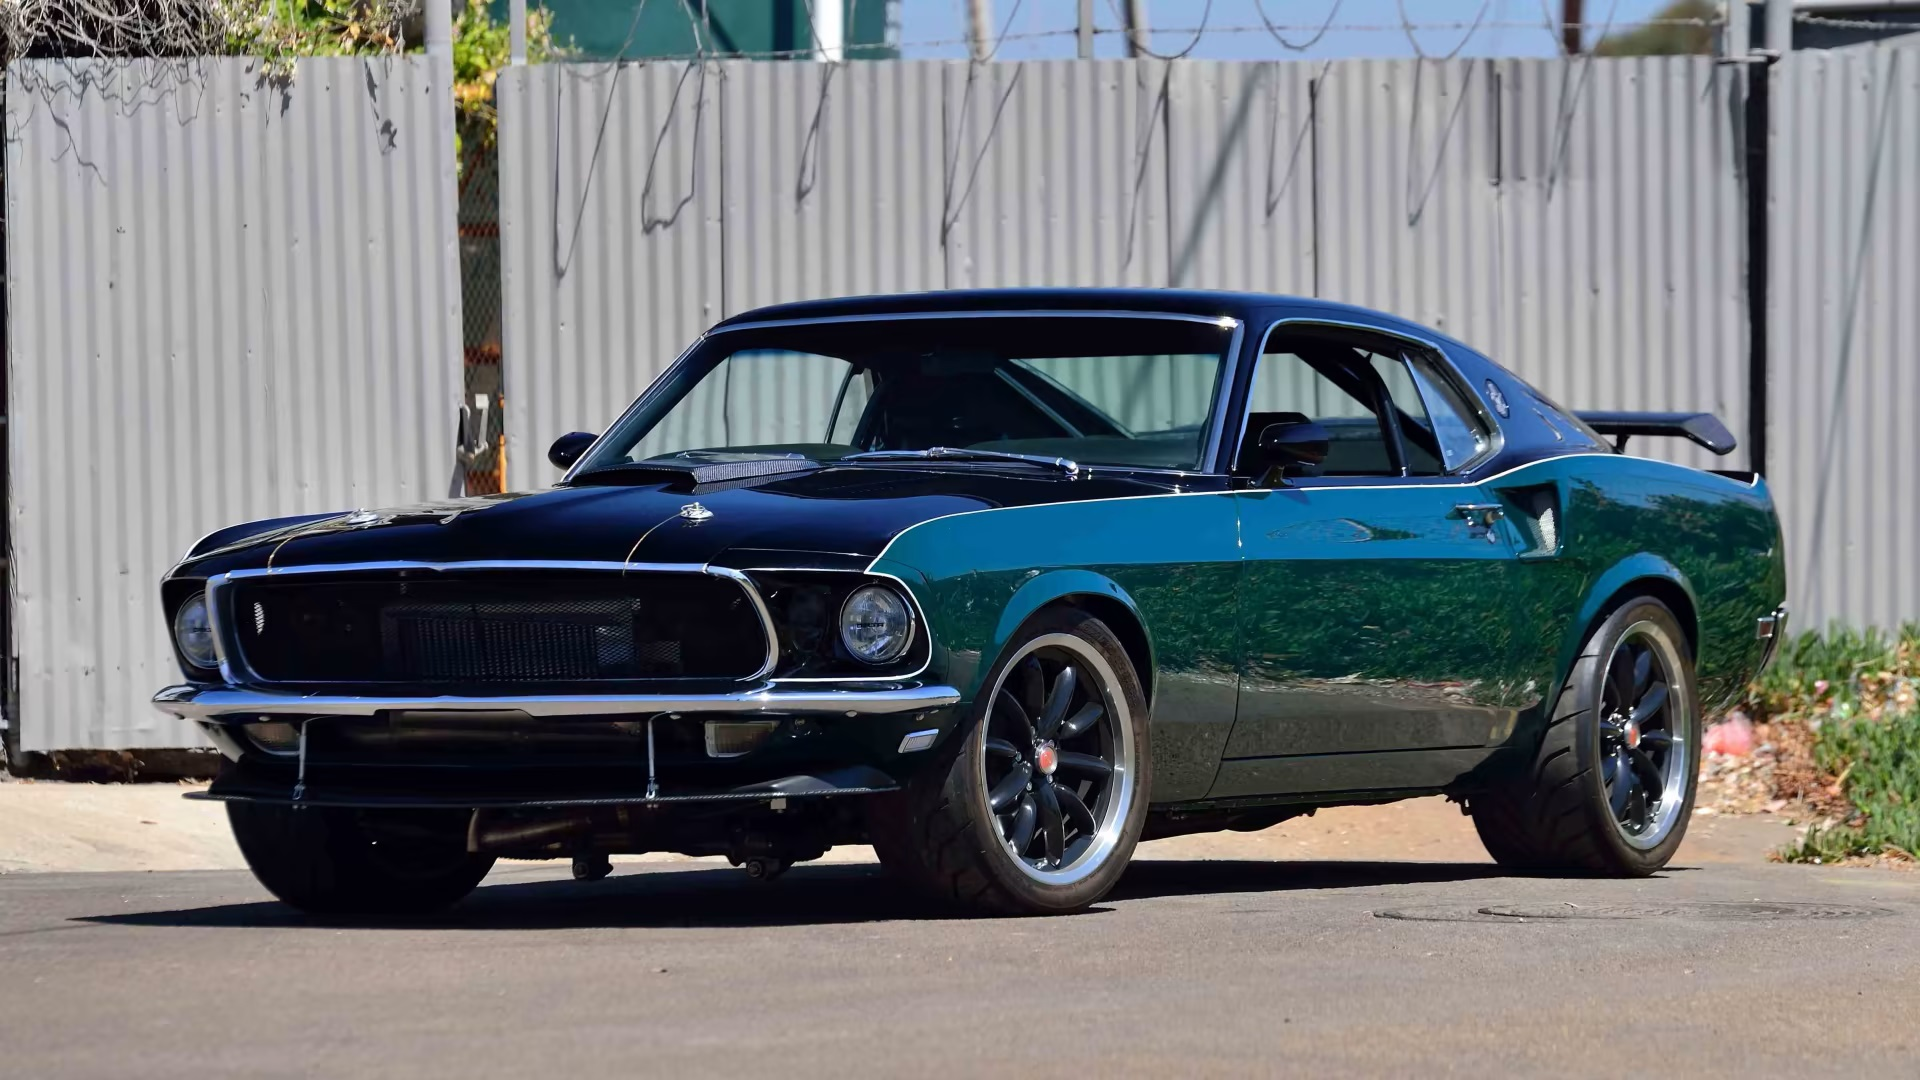 Mustang Of The Day: 1969 Ford Mustang Mach 1 Resto Mod